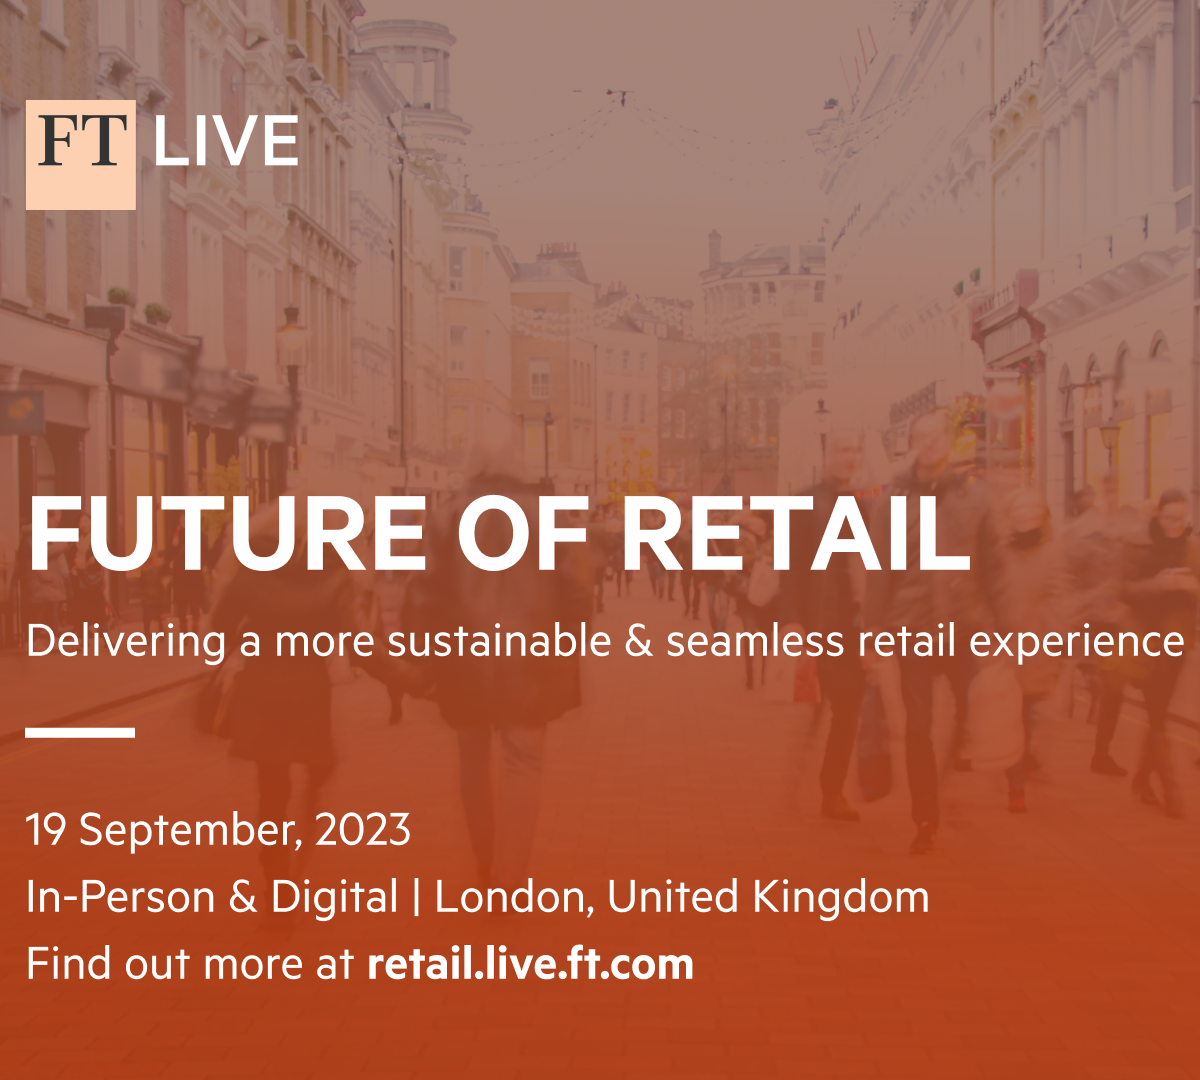 FT Live | Future of Retail